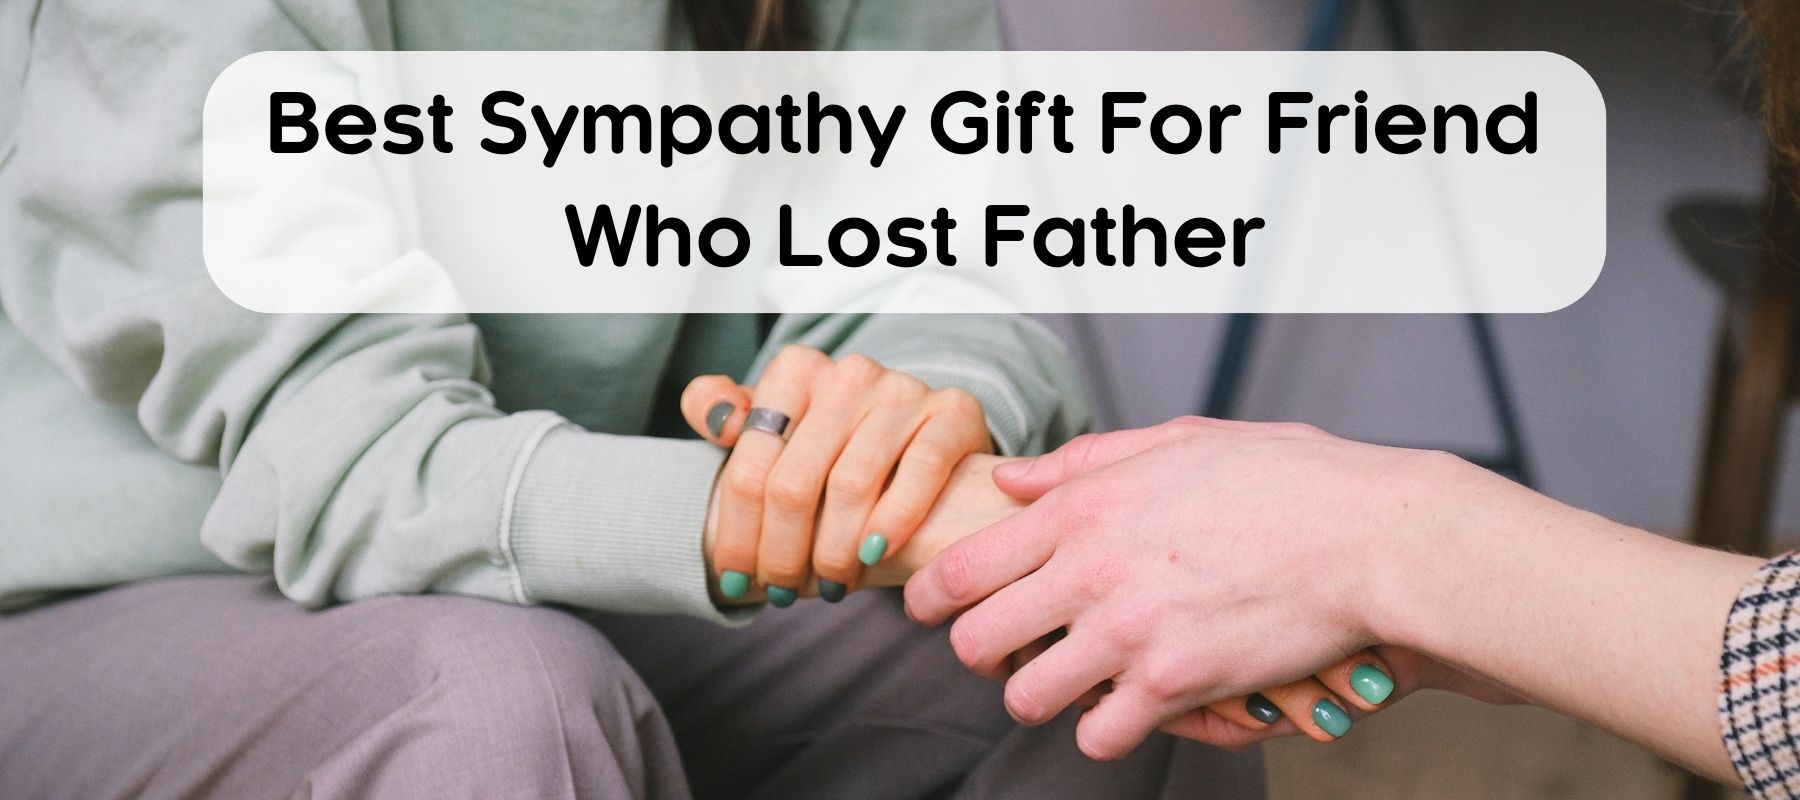 Gifts-for-friend-who-lost-father